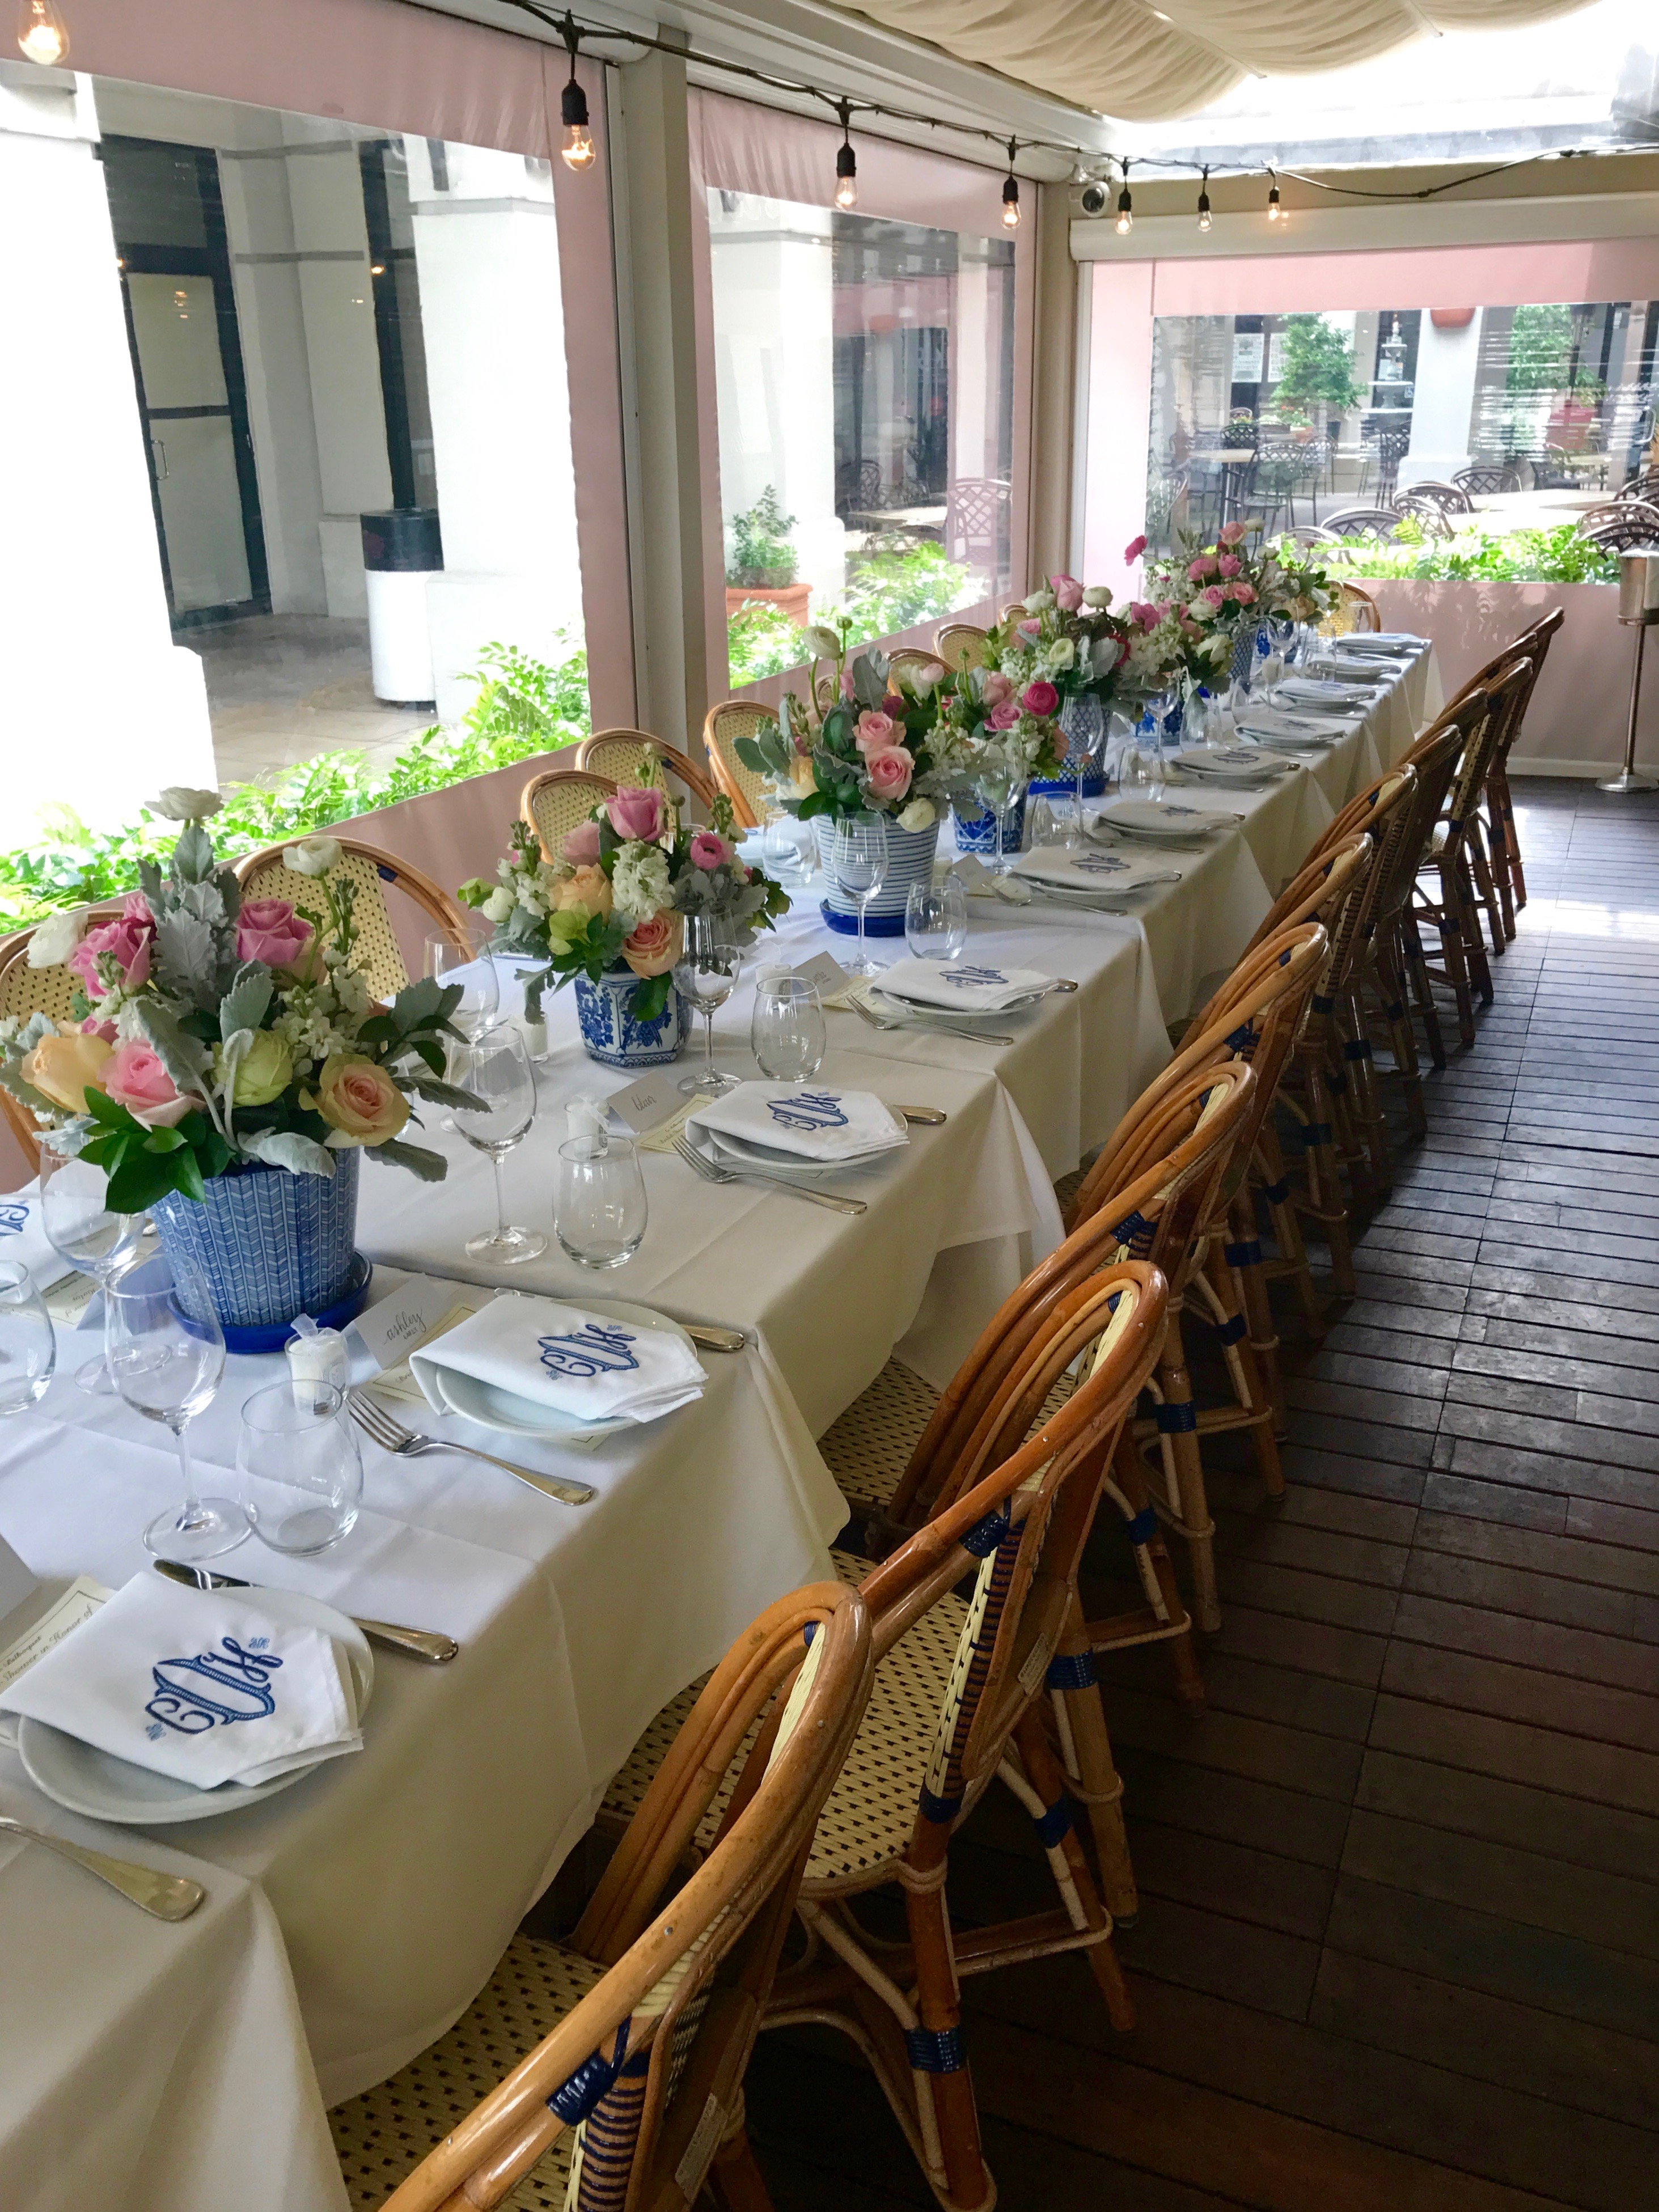 Bridal Shower by Christina Dandar for The Potted Boxwood 22